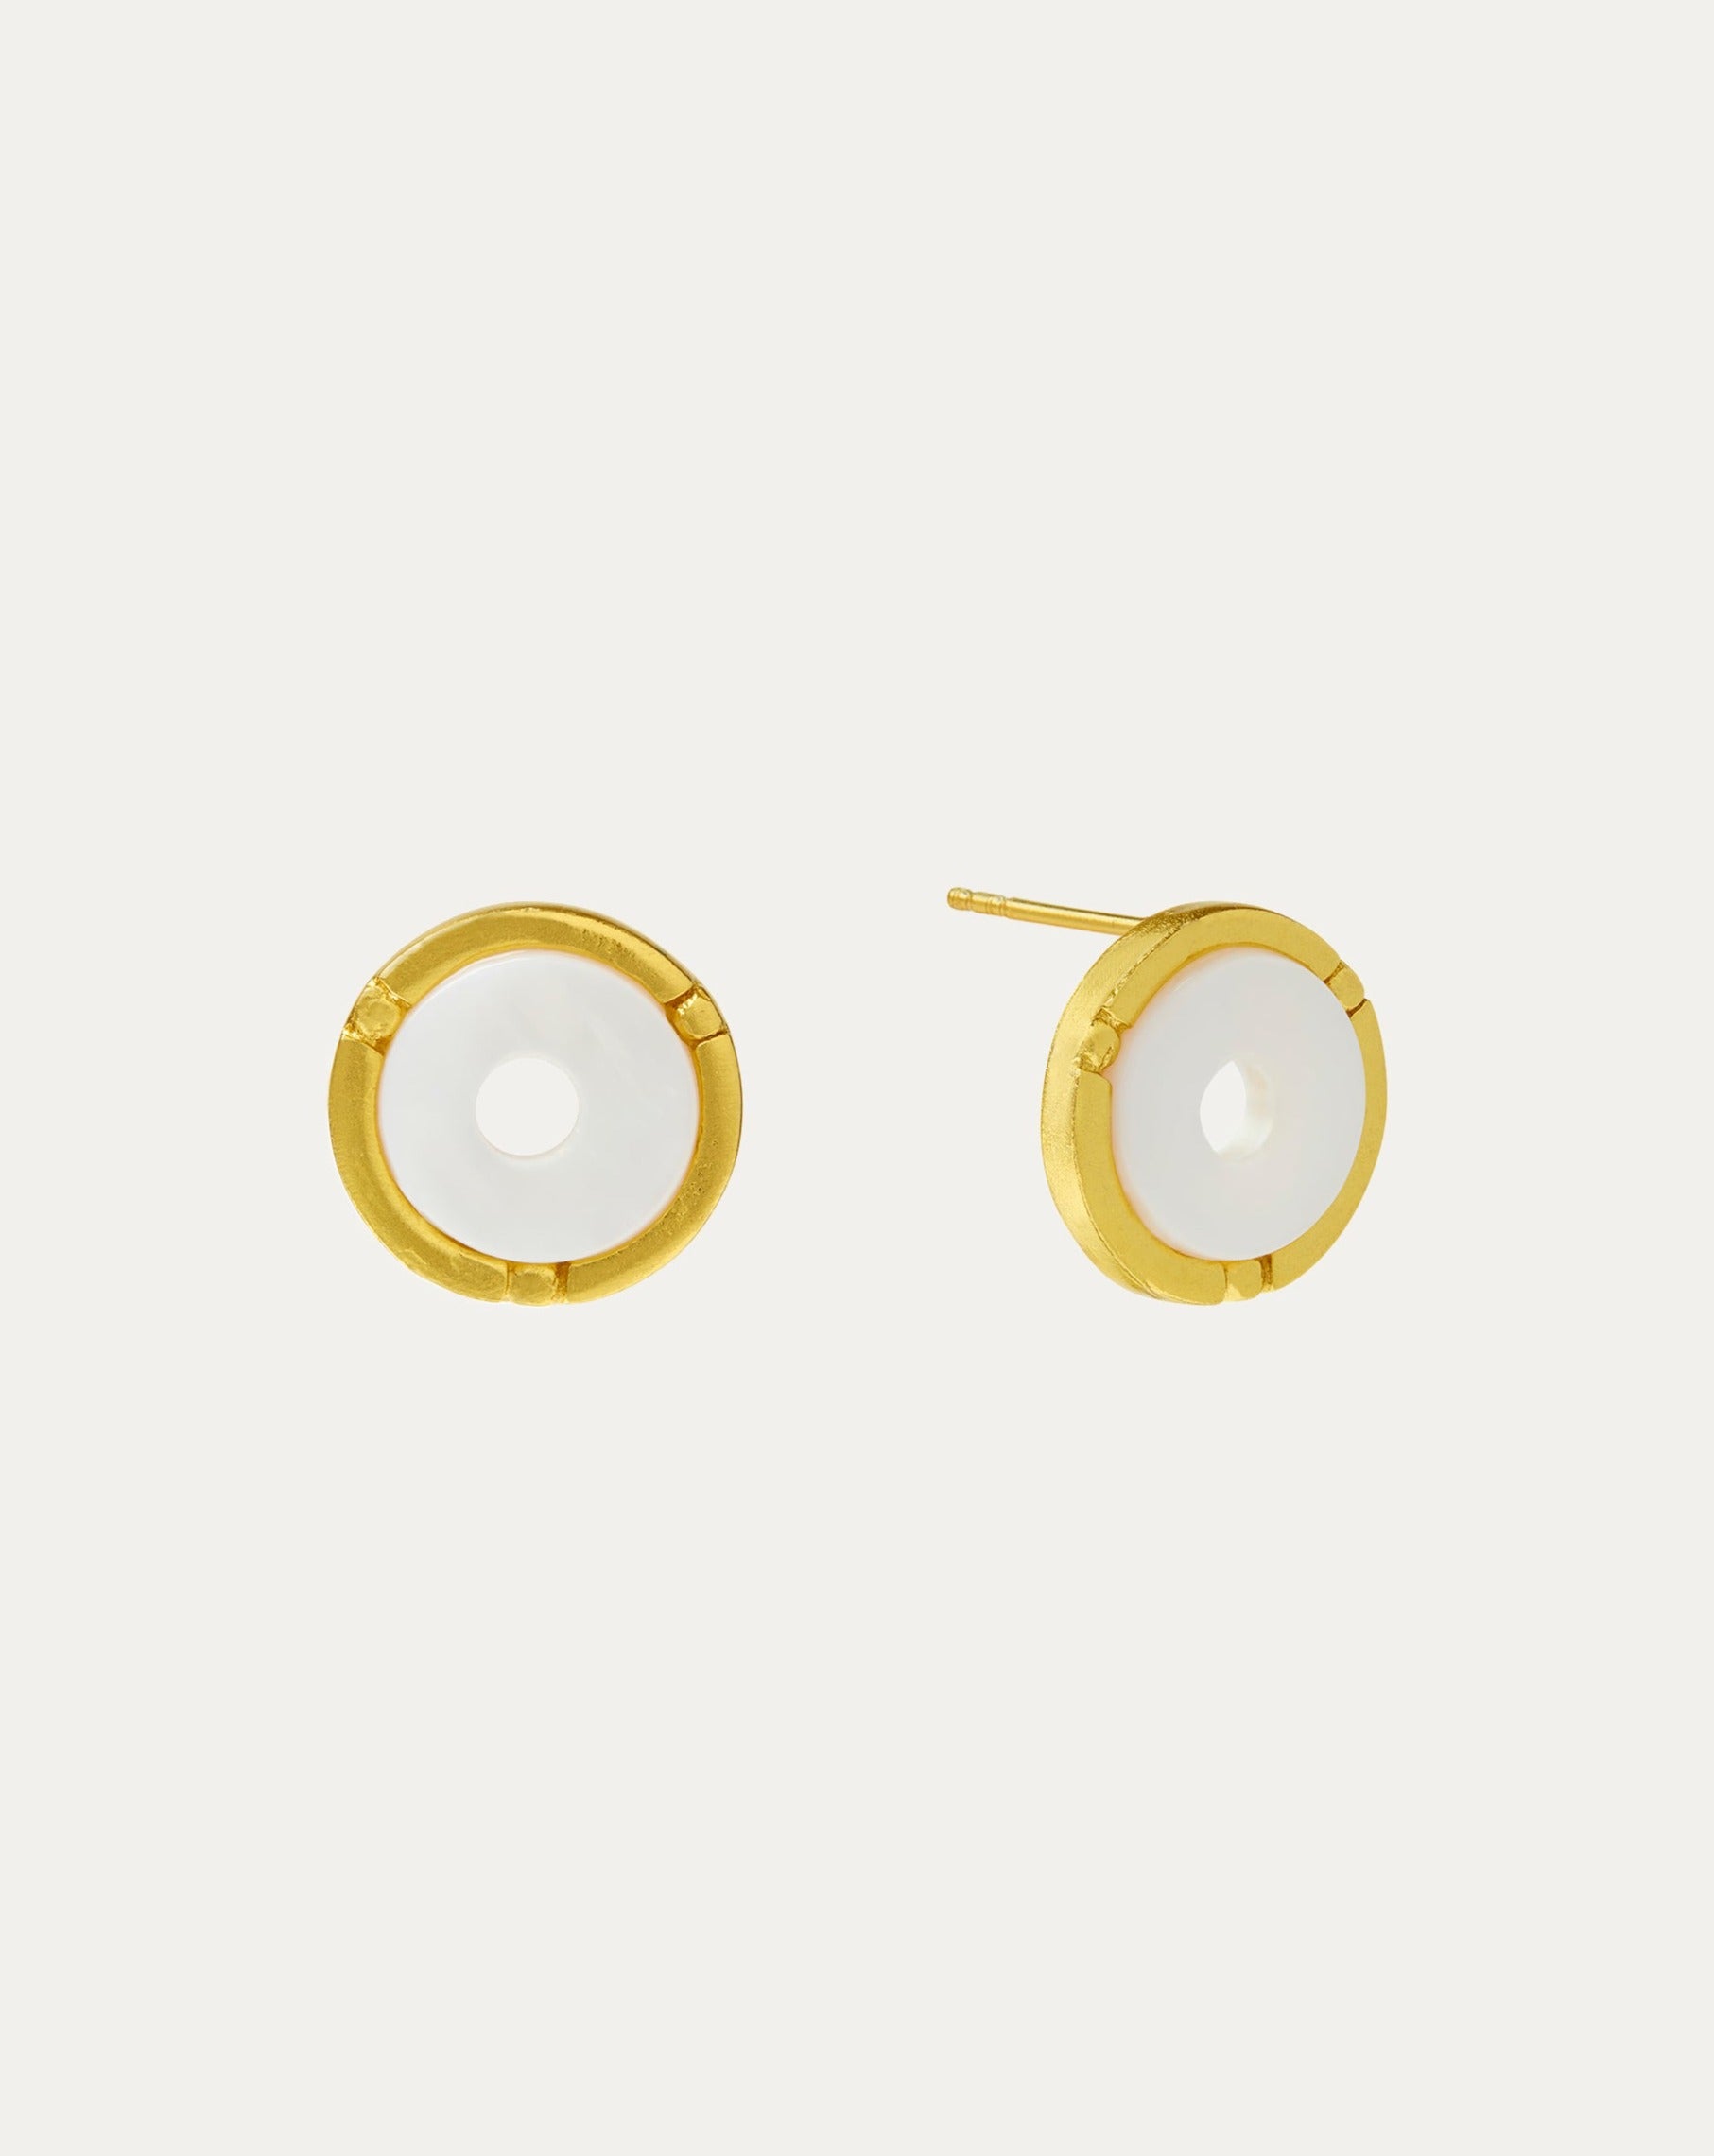 Hallie Mother of Pearl Stud Earrings | Sustainable Jewellery by Ottoman Hands